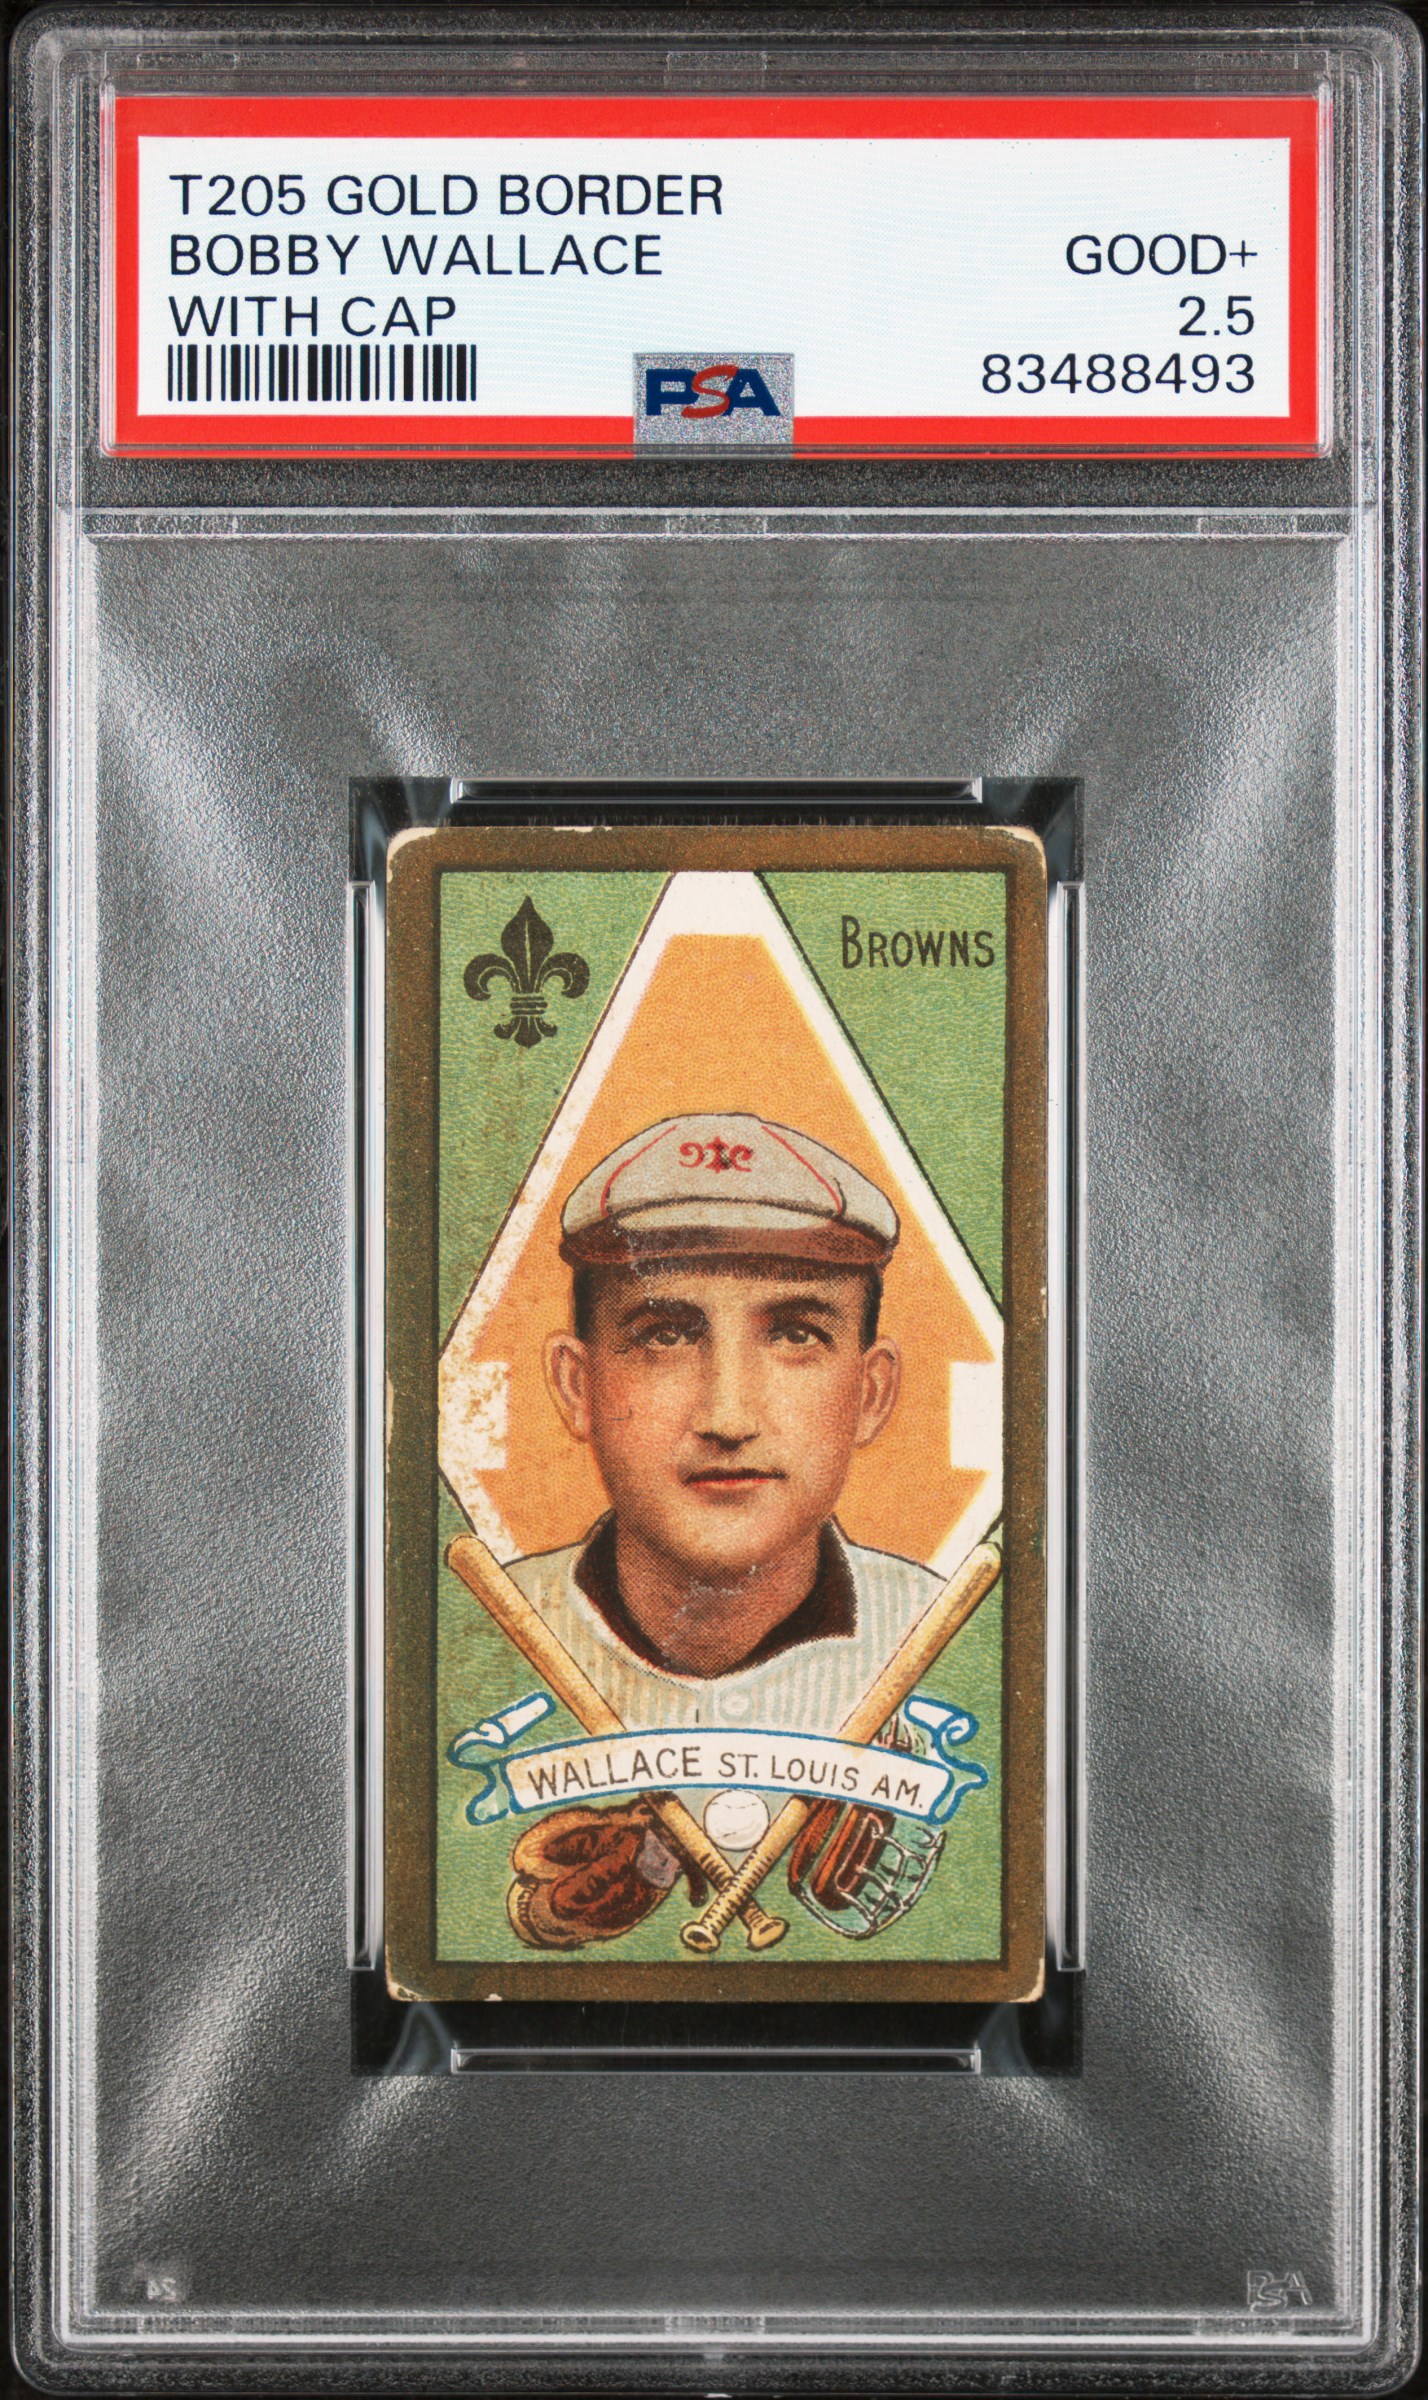 1911 T205 Gold Border Bobby Wallace, With Cap - PSA GD+ 2.5